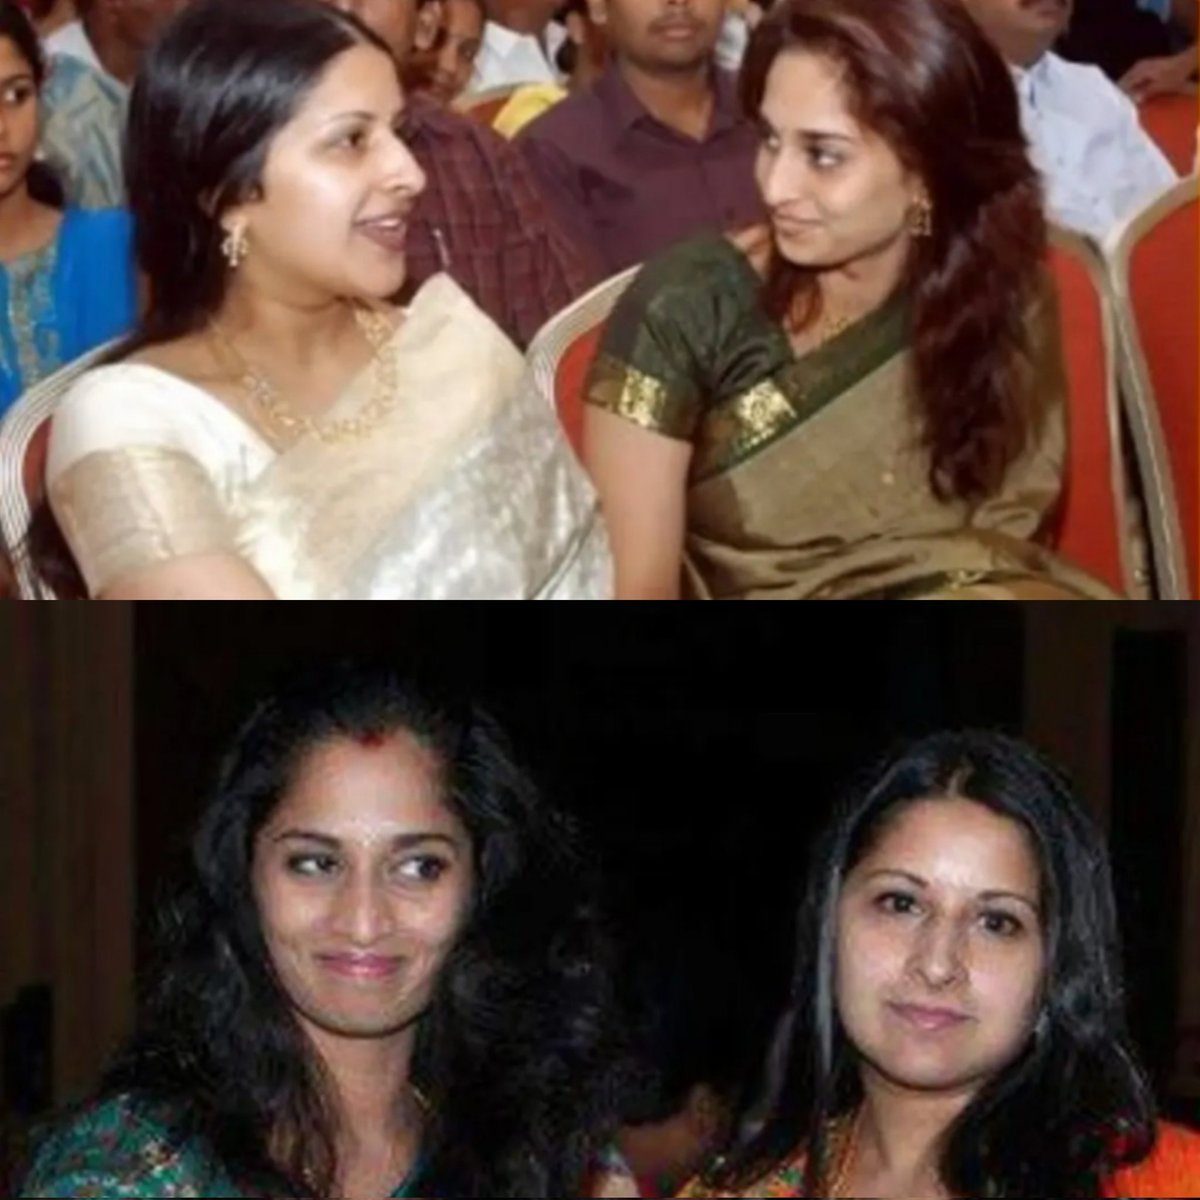 Sangeetha & Shalini are way better than tier 4 actor's wife. They won't interfere in unwanted things in public or in their husband's profession